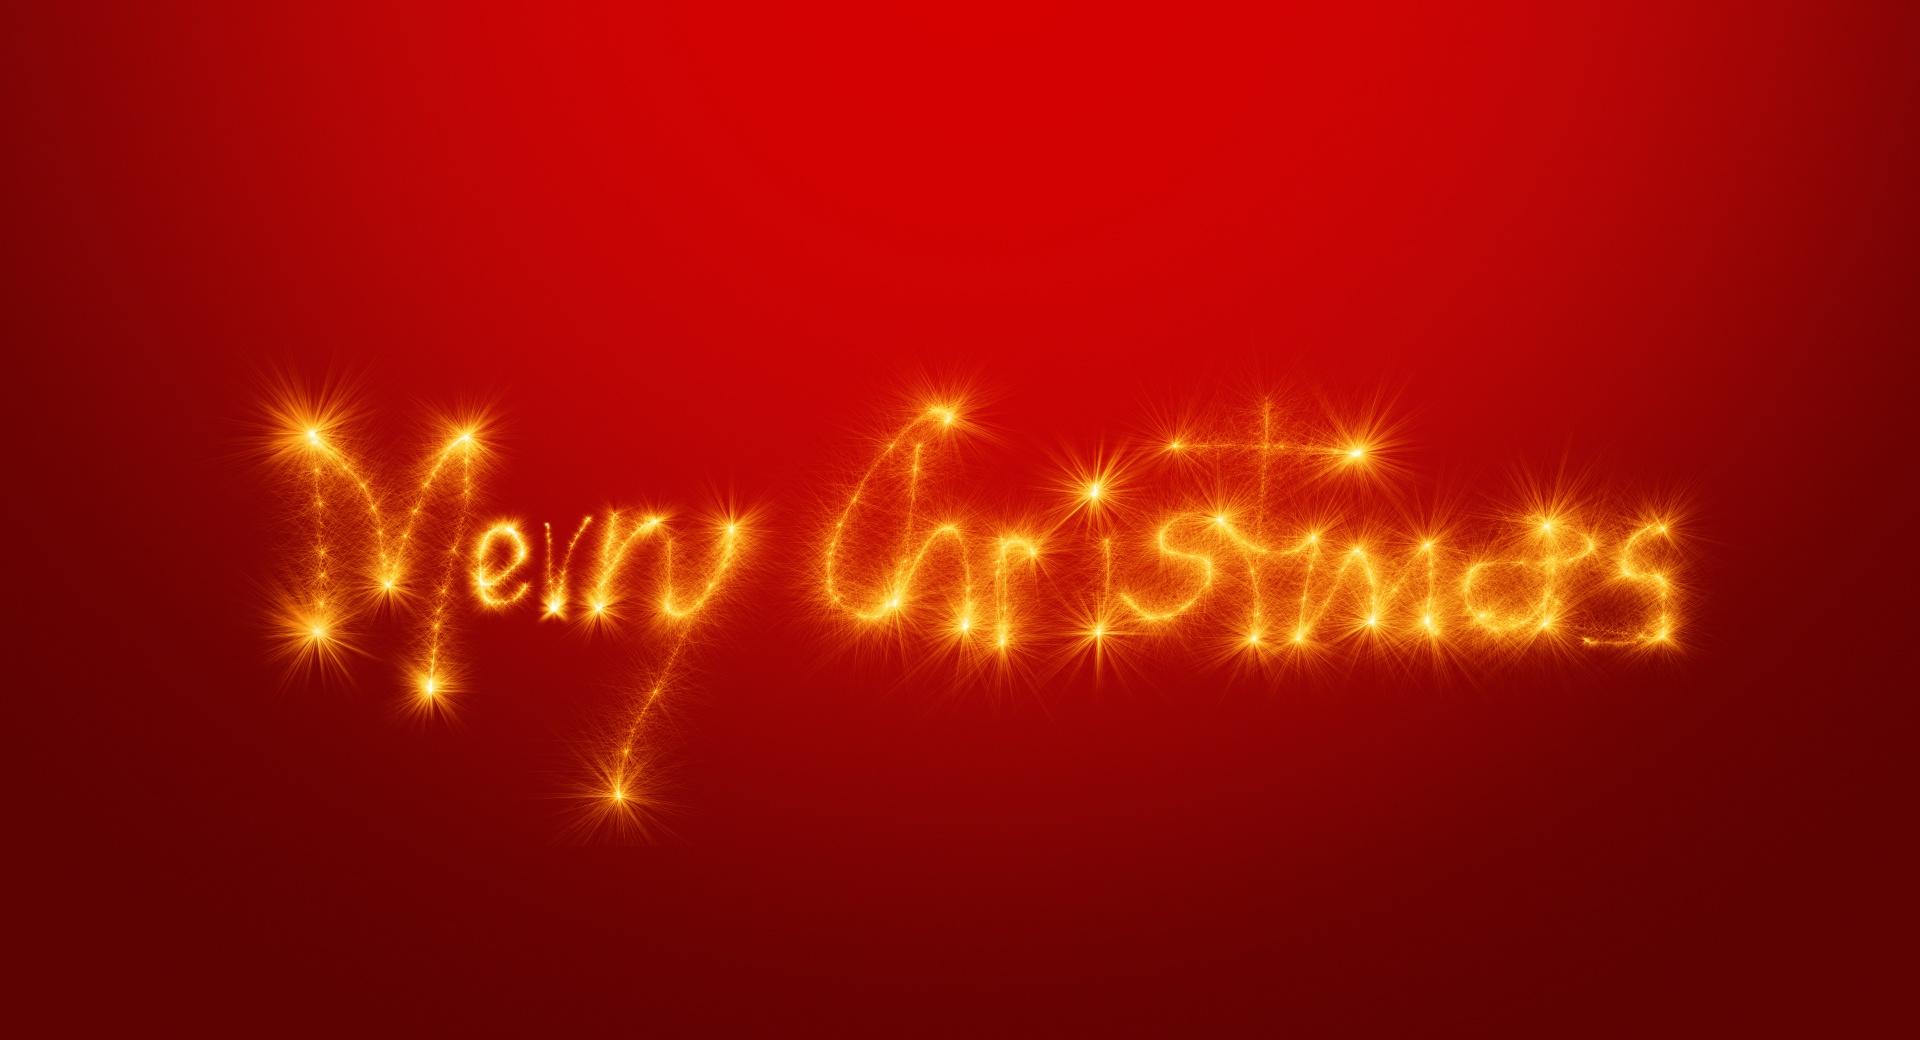 Merry Christmas 2016 wallpapers HD quality